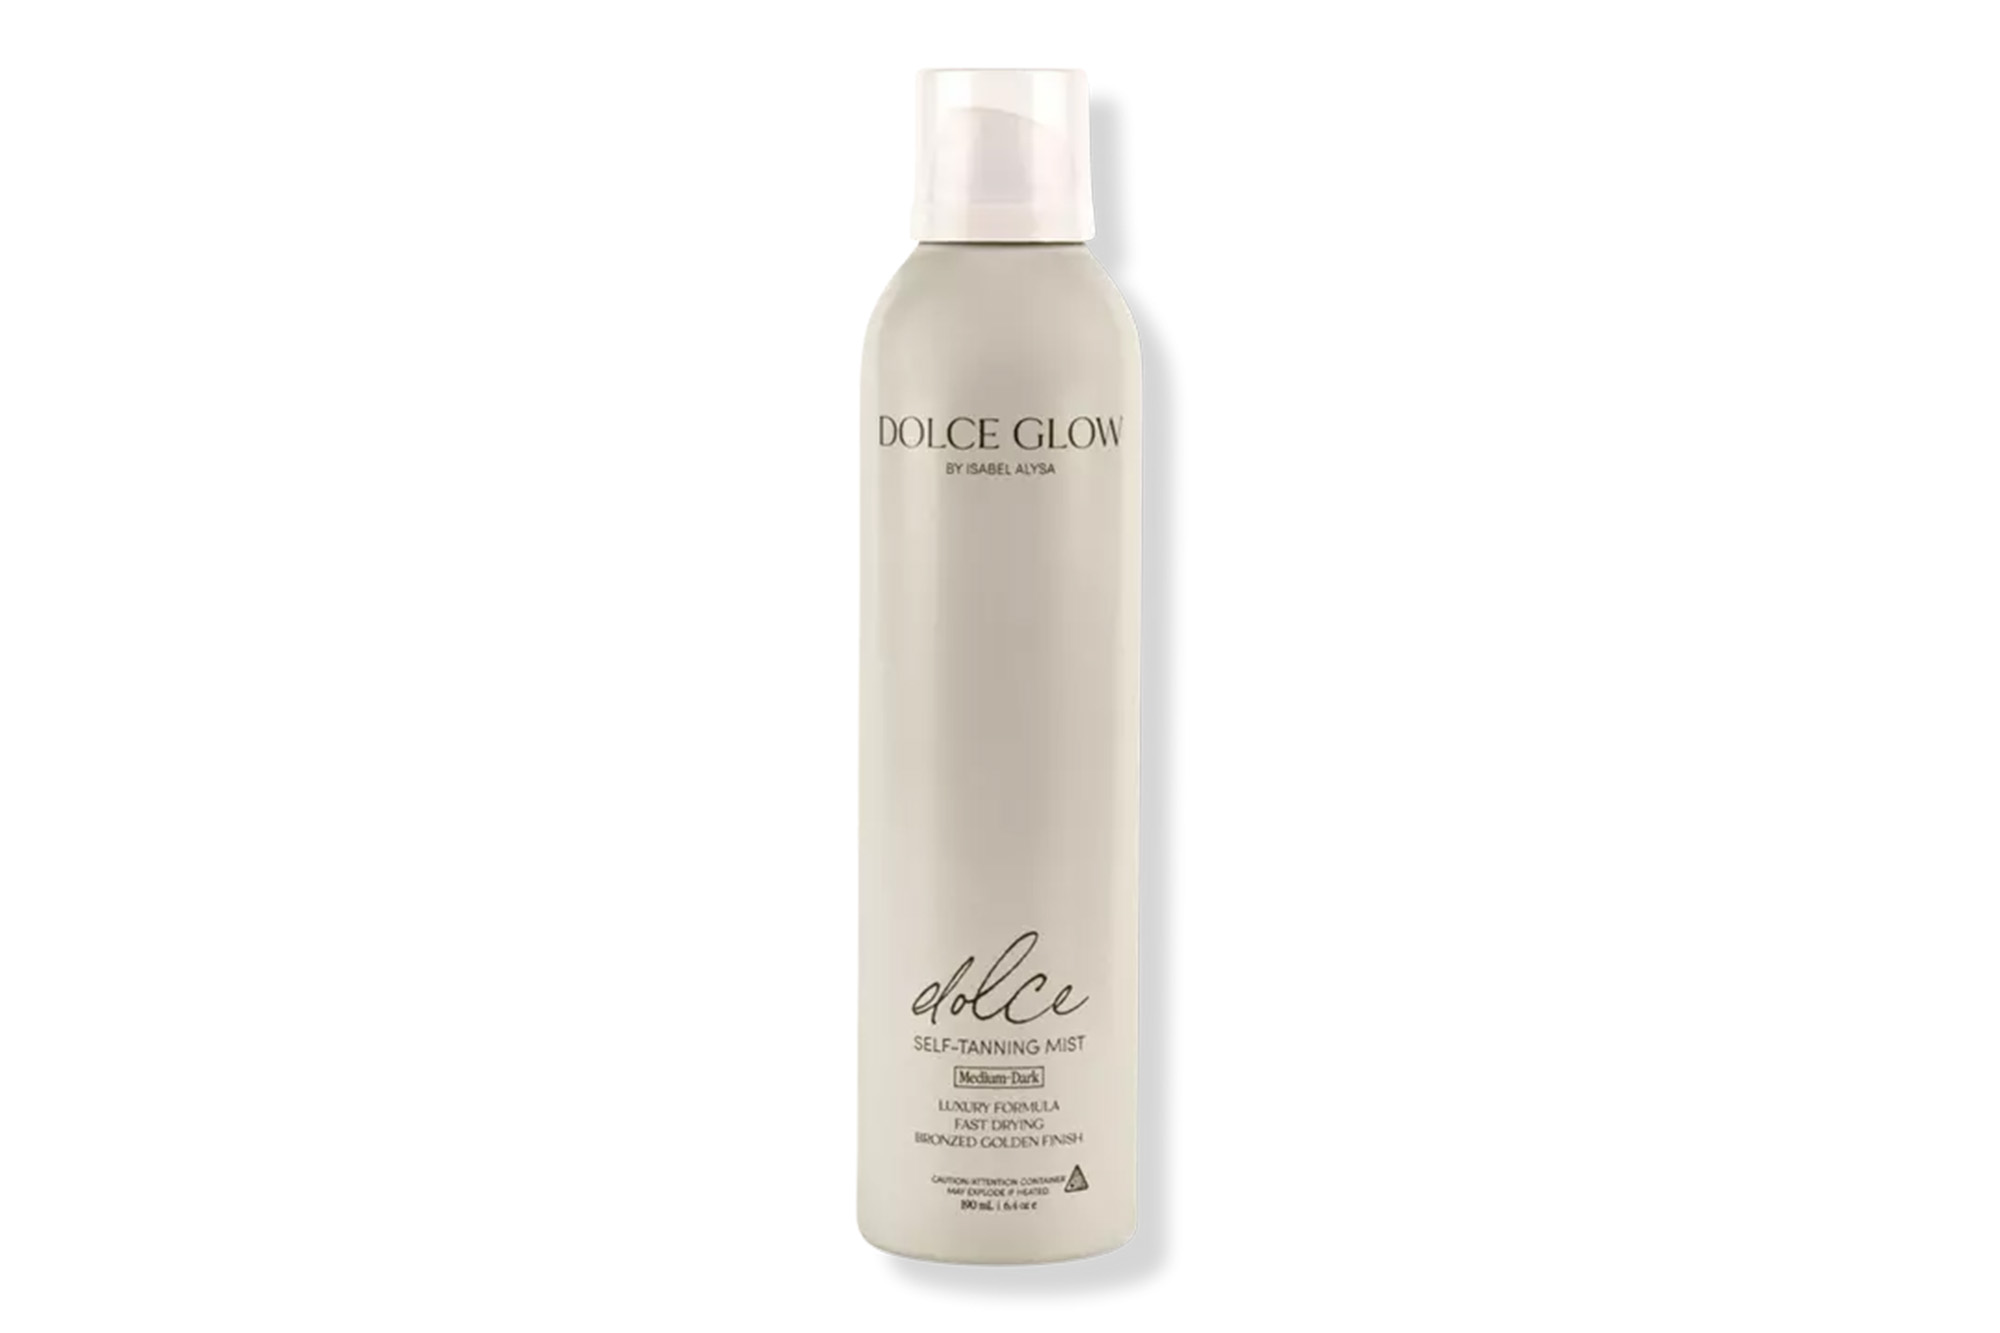 Dolce Glow Luce Self-Tanning Mist